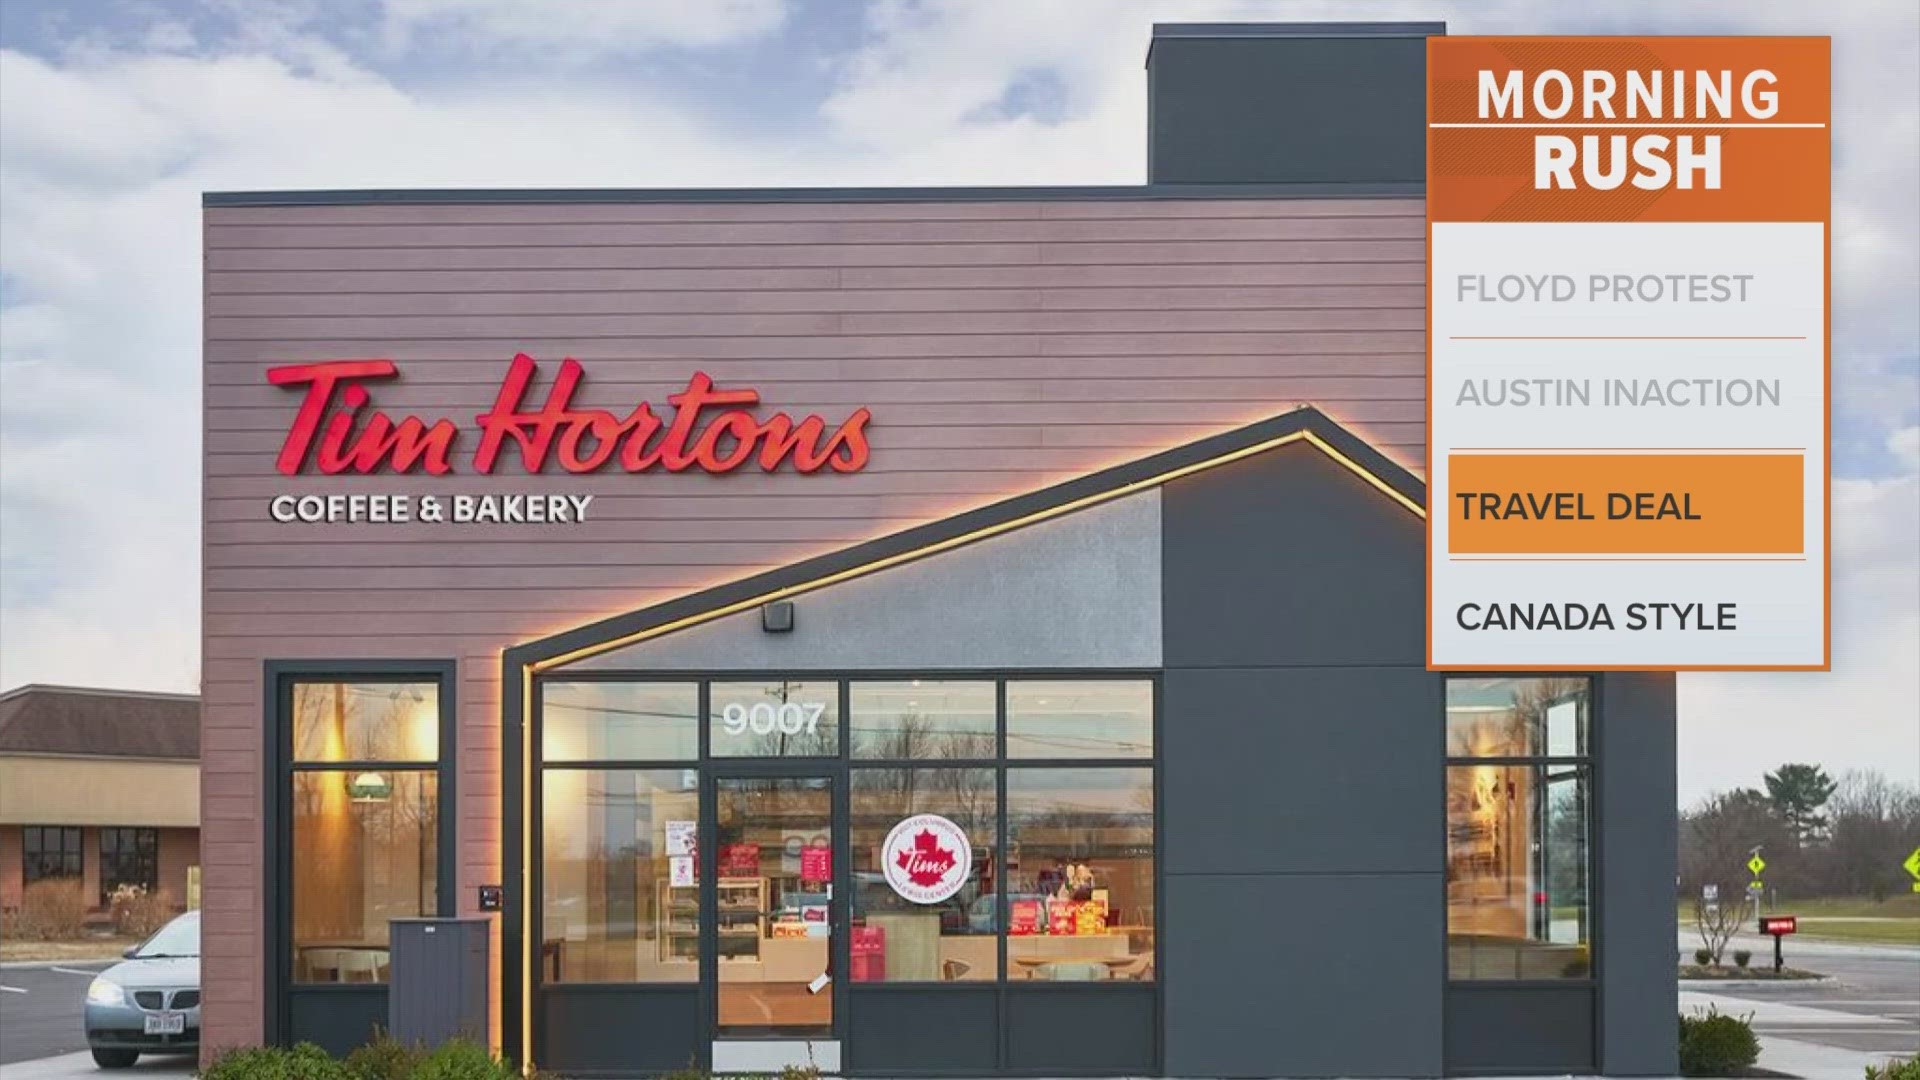 With construction expected to begin in March, Tim Hortons Coppell plans to occupy 1,640 square feet of space.